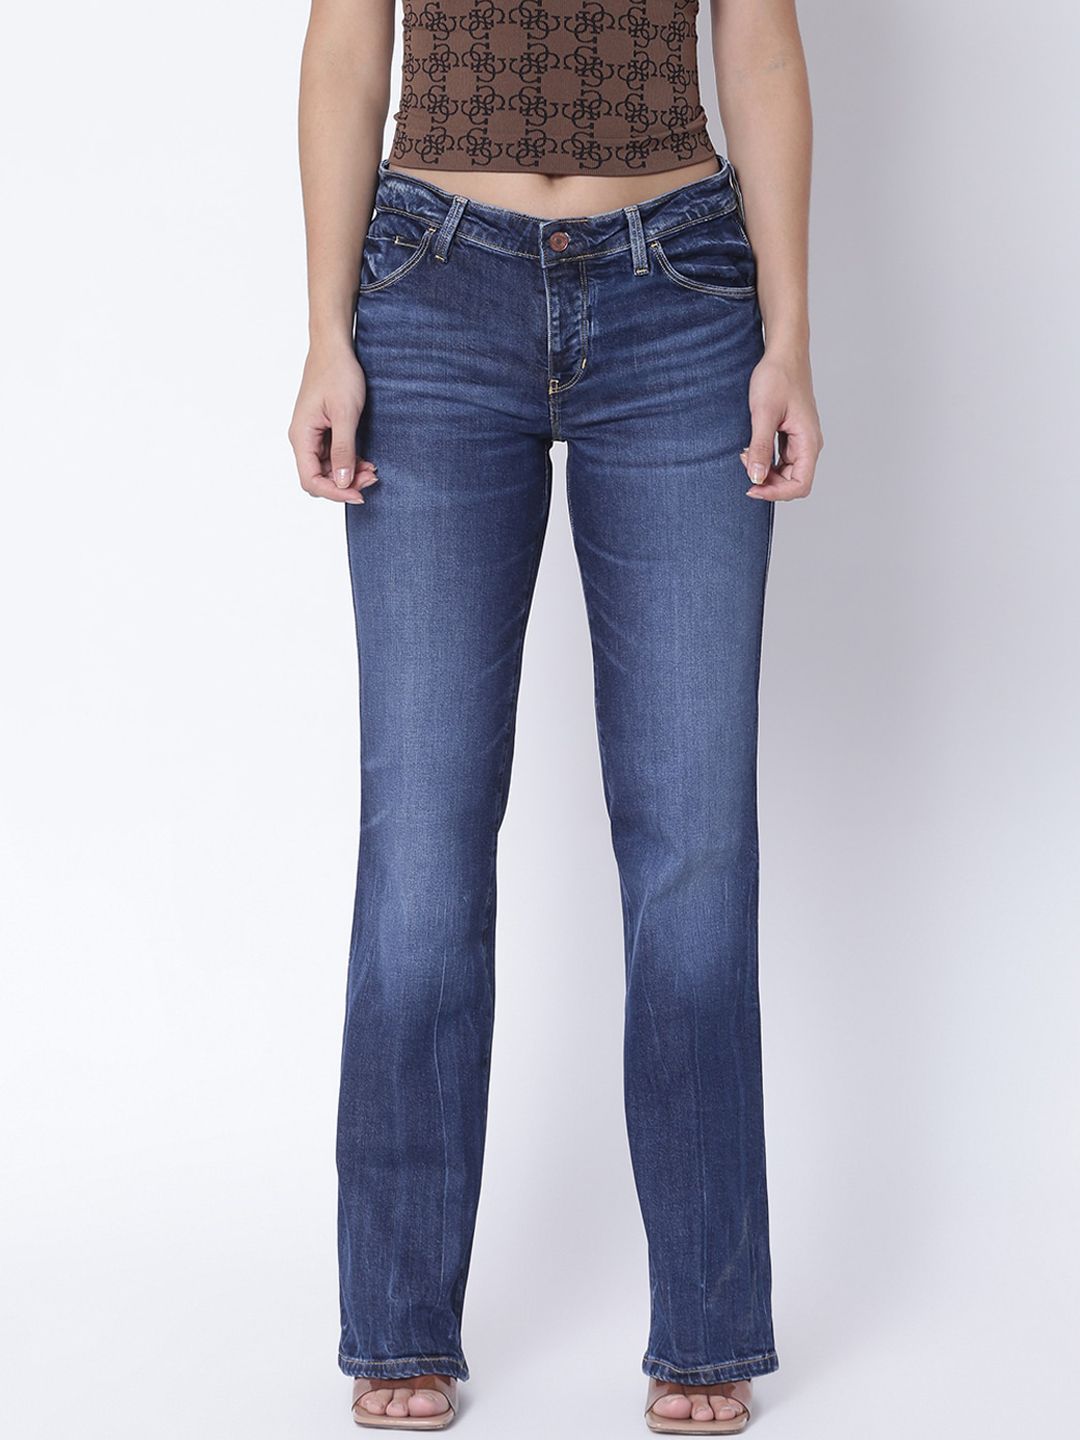 GUESS Women Assorted Low Distress Light Fade Jeans Price in India